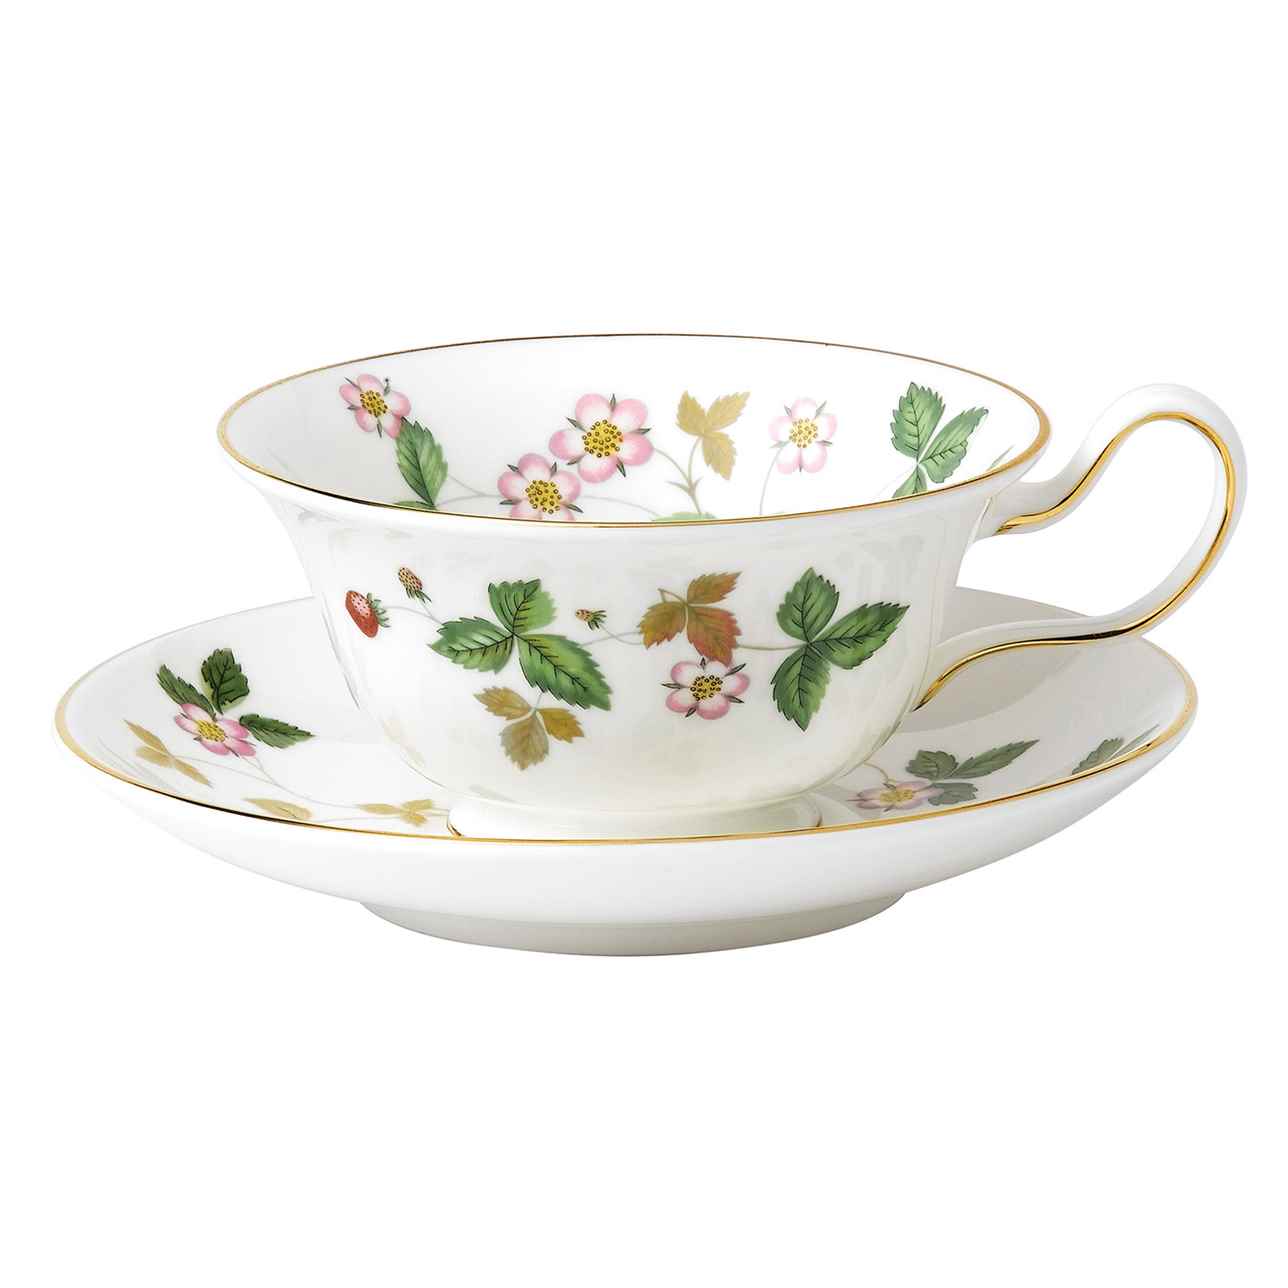 Wild Strawberry Peony Teacup and Saucer, Gift Boxed